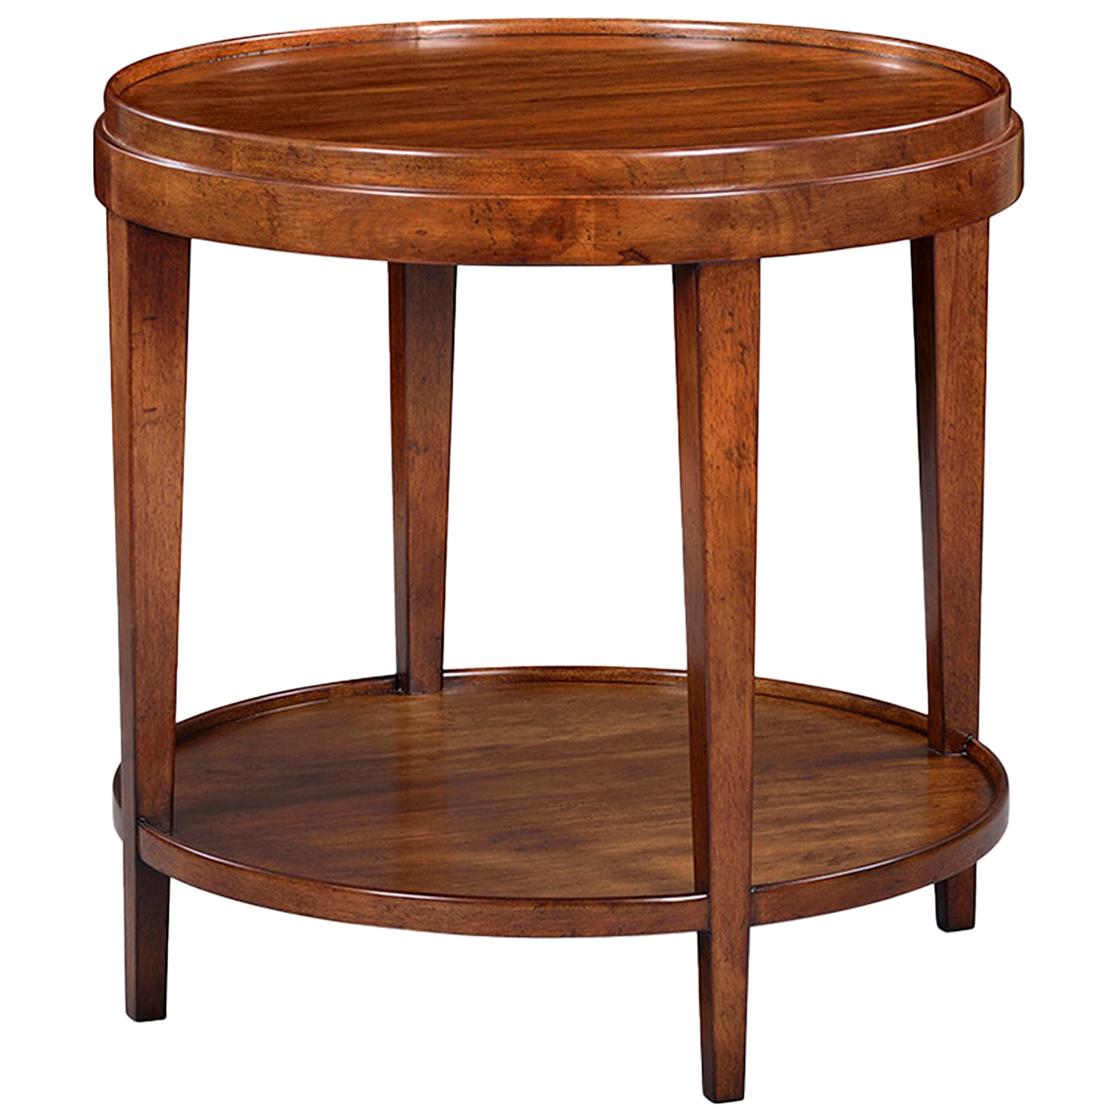 Classic Round End Table, Walnut